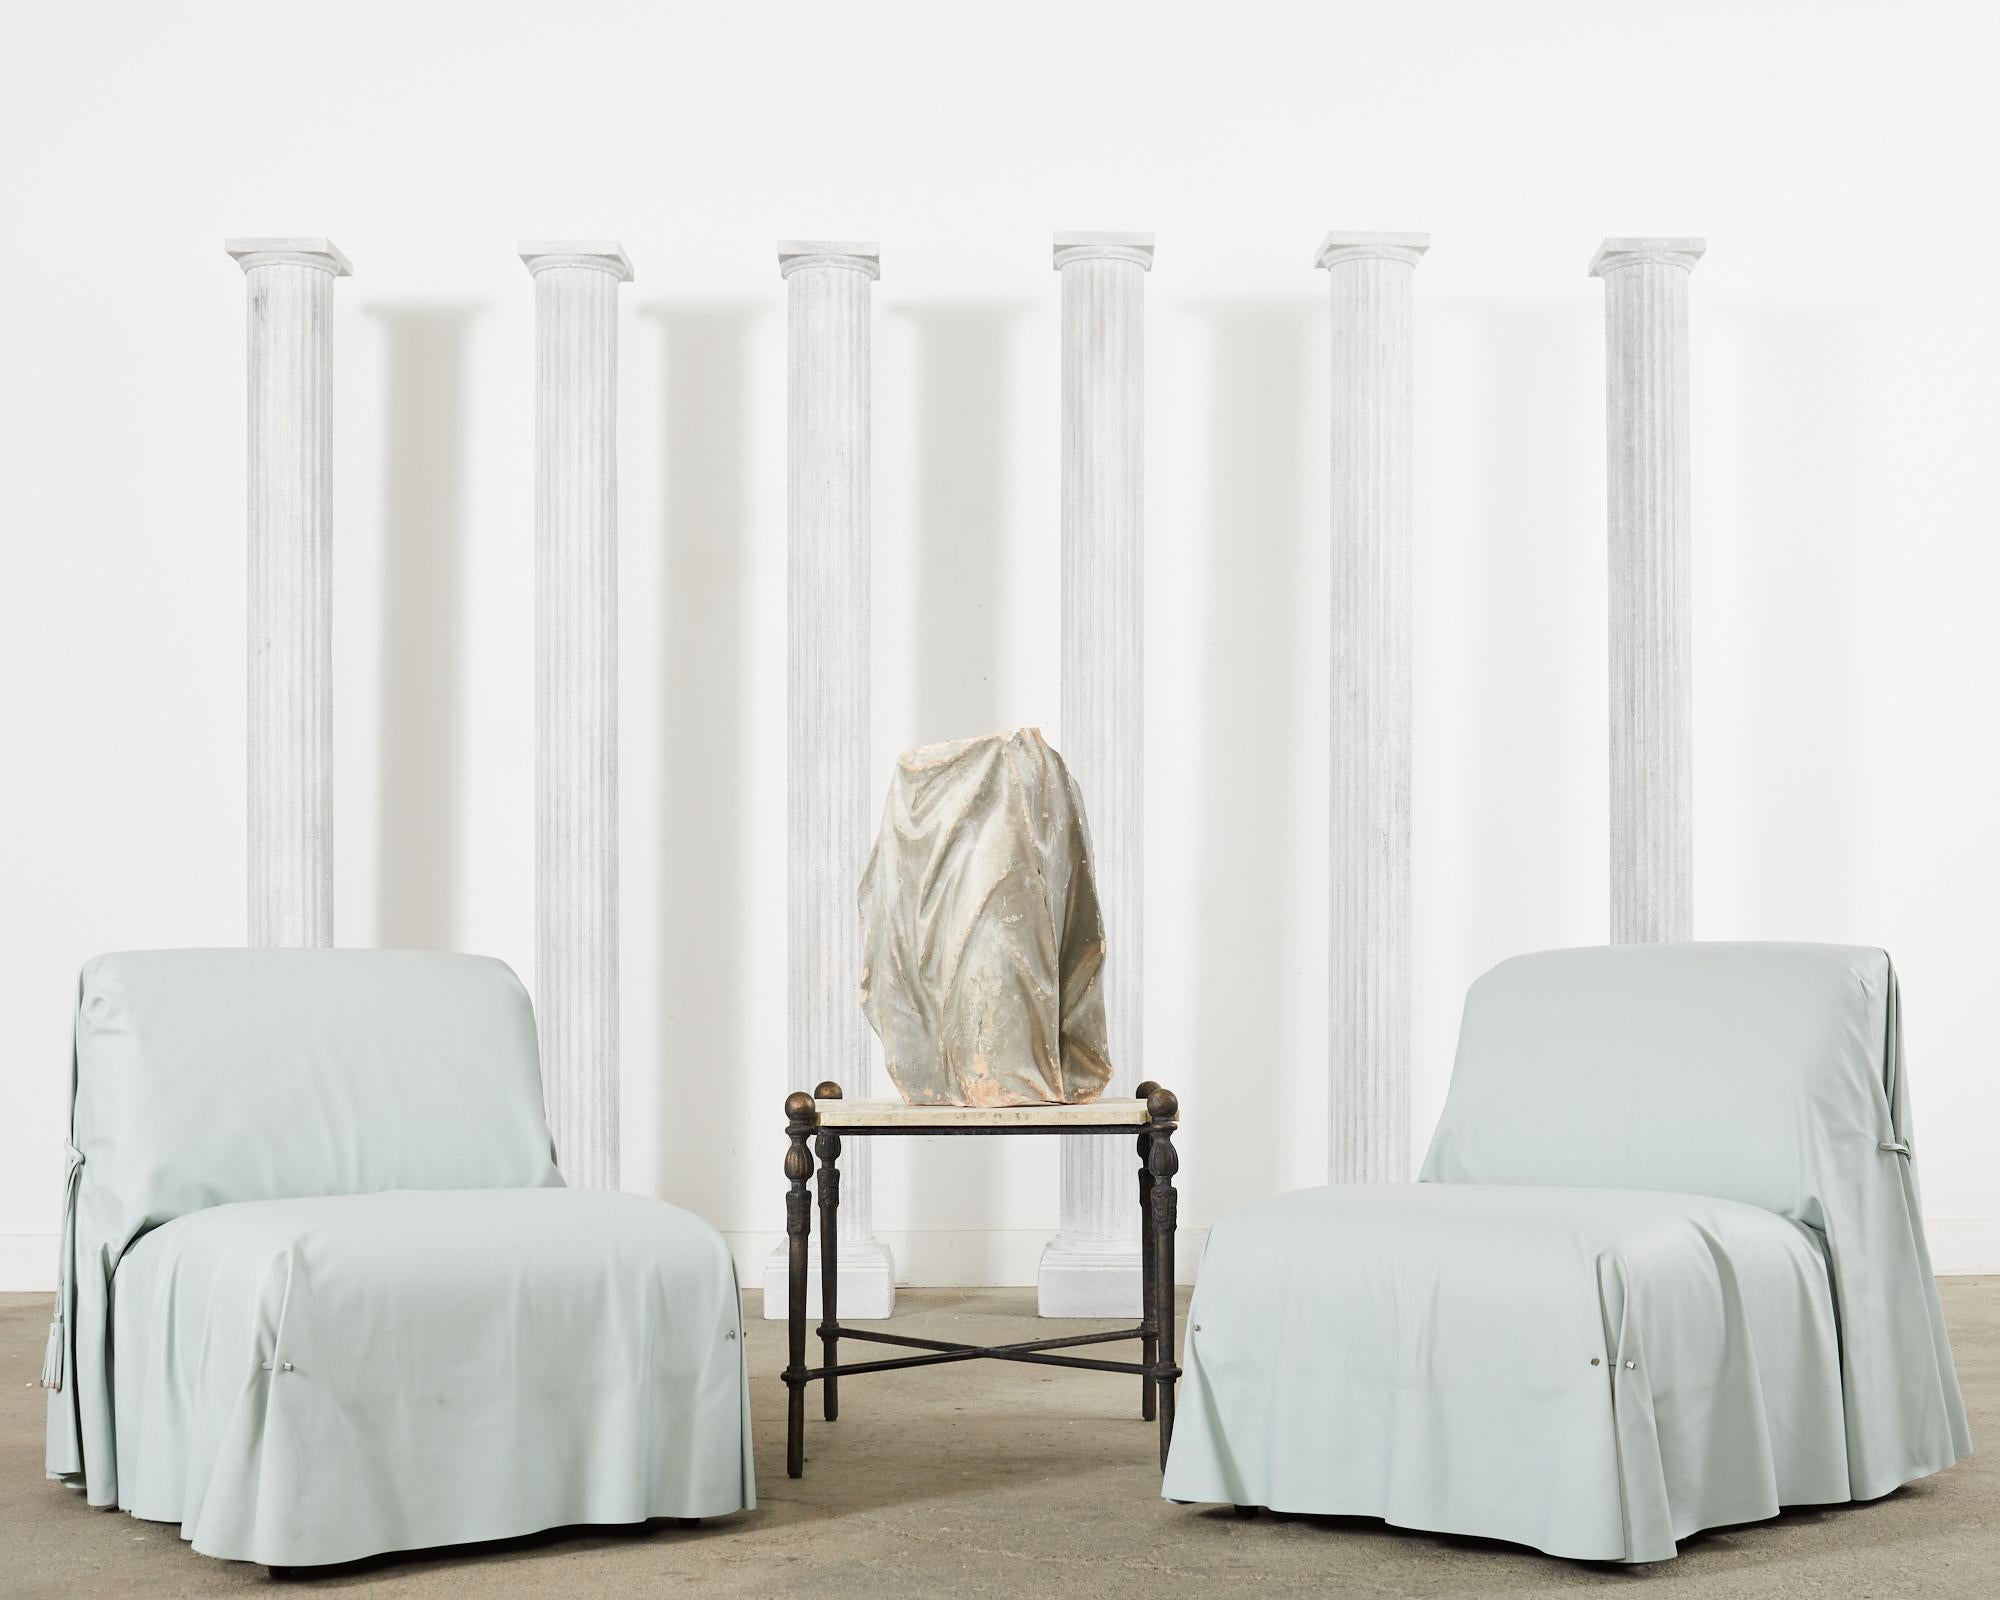 Imposing set of six matching zinc metal columns made in the Greco-Roman neoclassical style. The columns feature a slender fluted shaft with simple capitals in the doric taste. Handsome profile crafted from zinc metal with an intentionally distressed